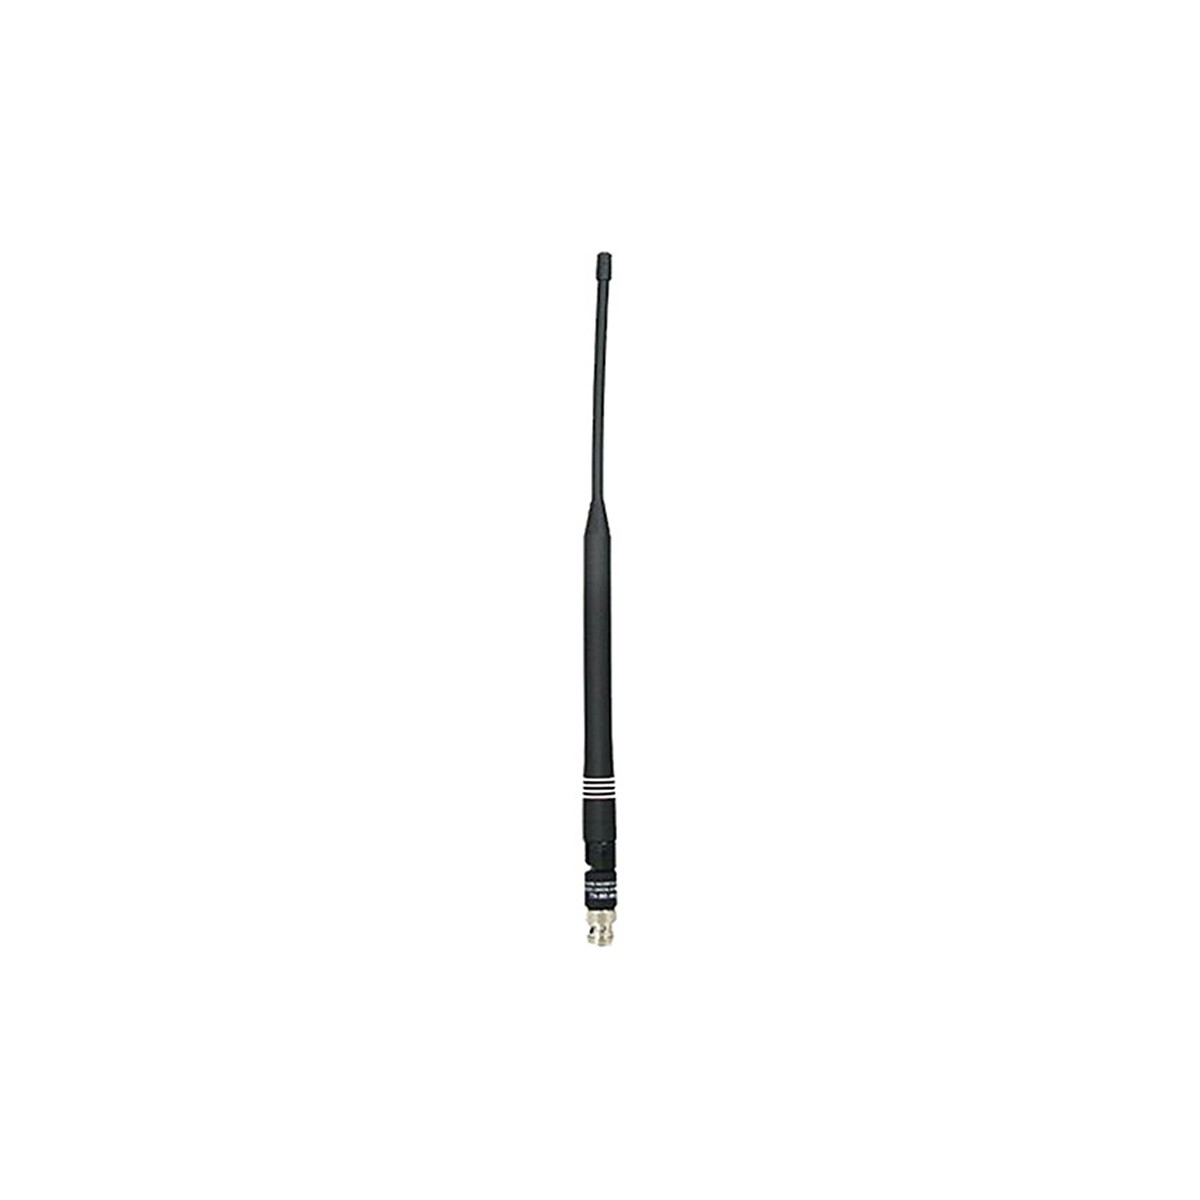 Shure UA8-518-578 1/2 Wave Omnidirectional Antenna for UR4S+/UR4D Receivers (Used)